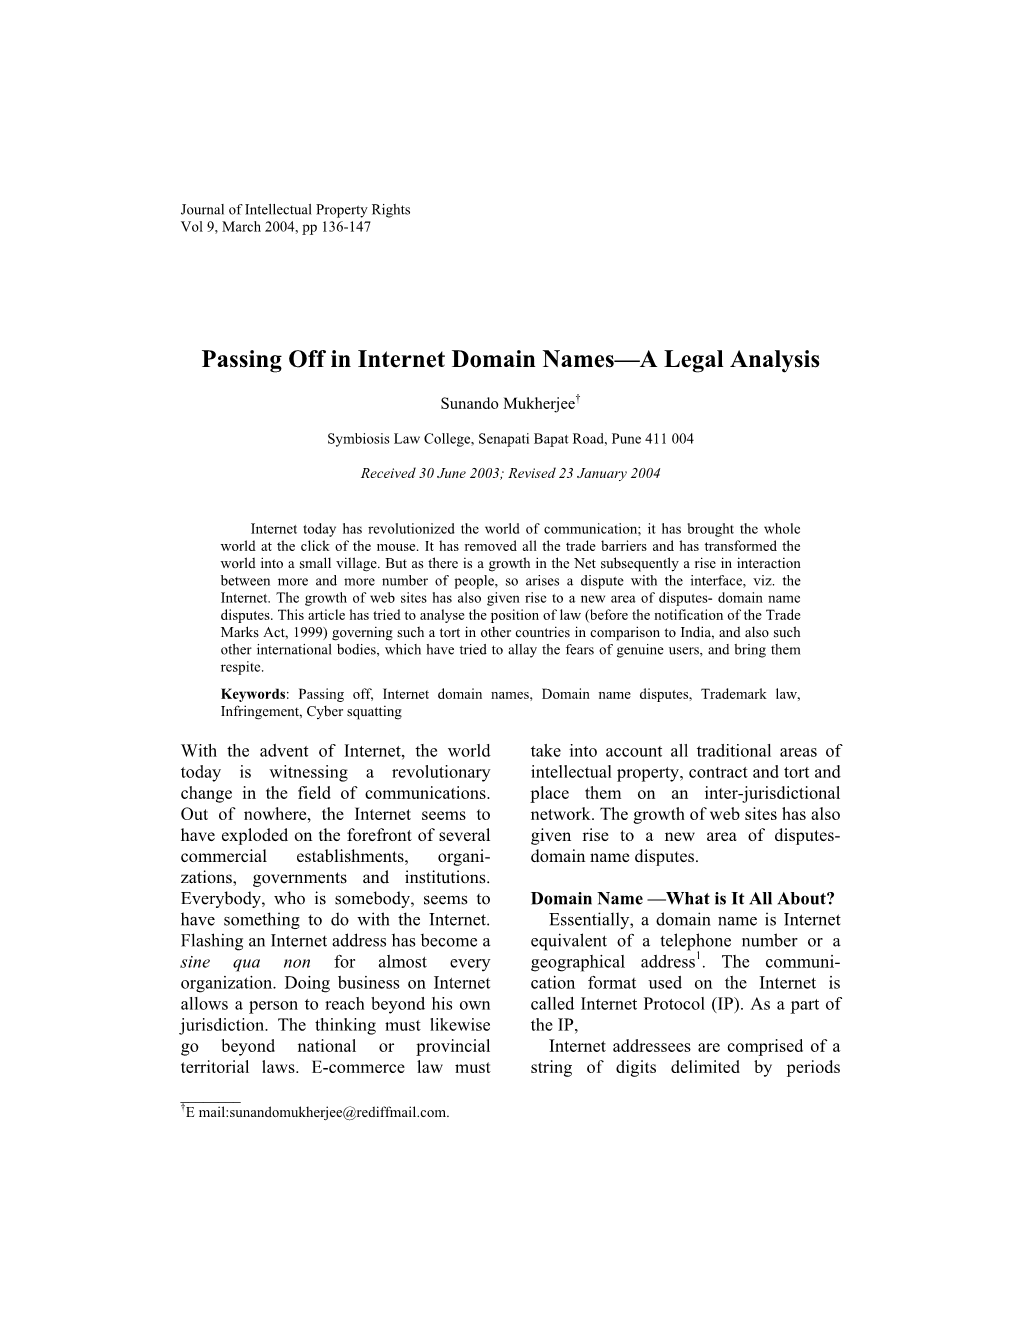 Passing Off in Internet Domain Names—A Legal Analysis